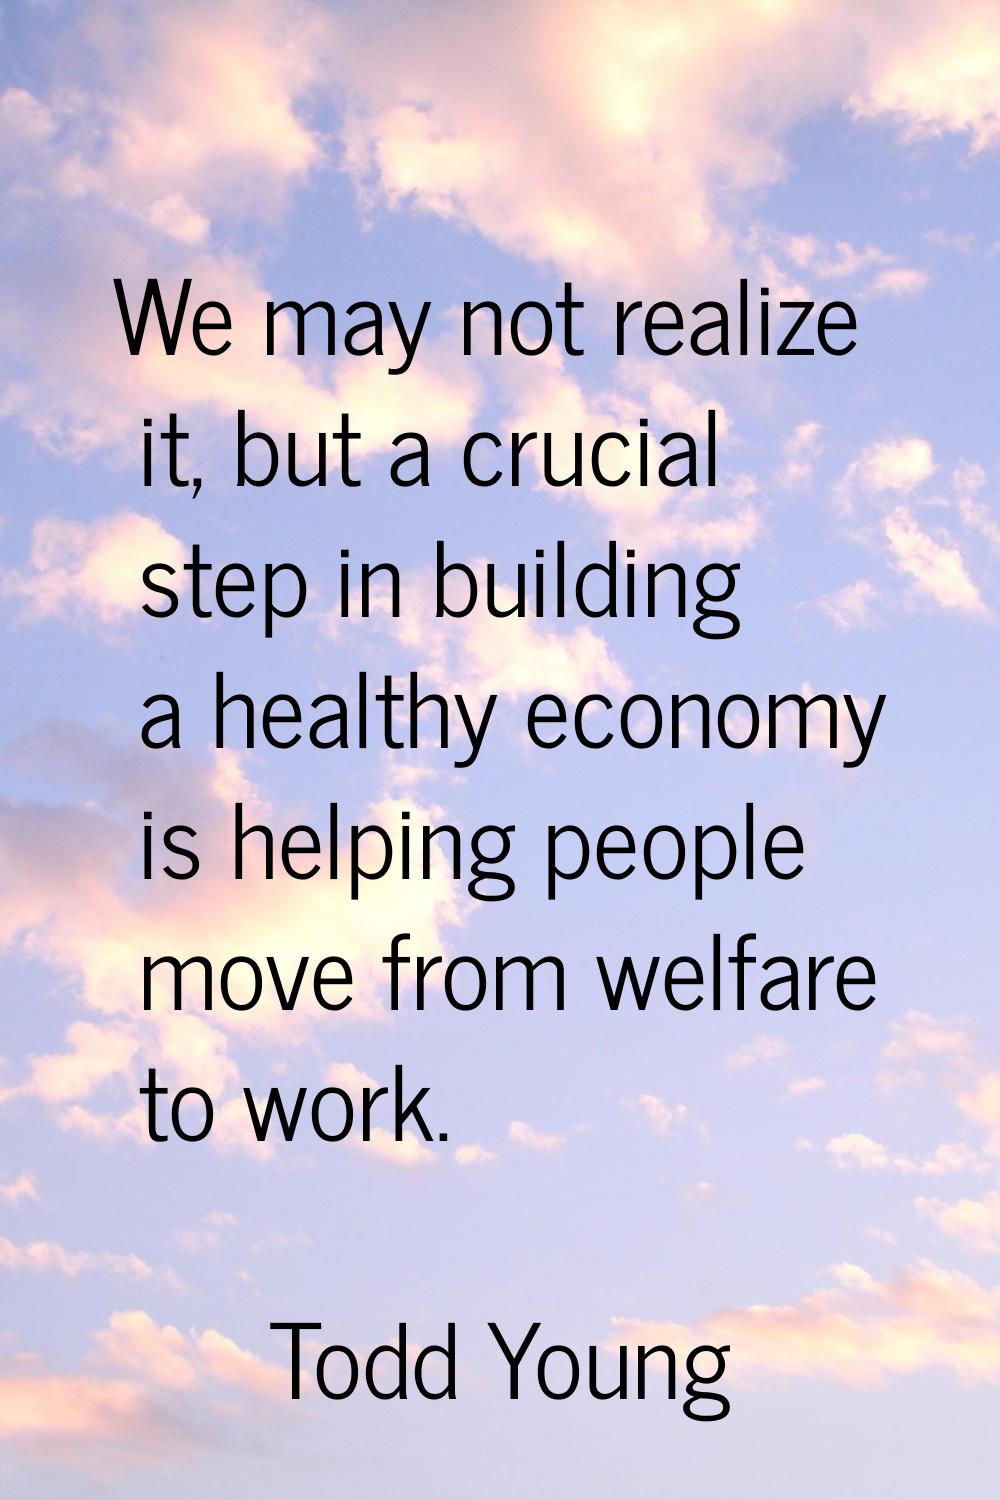 We may not realize it, but a crucial step in building a healthy economy is helping people move from